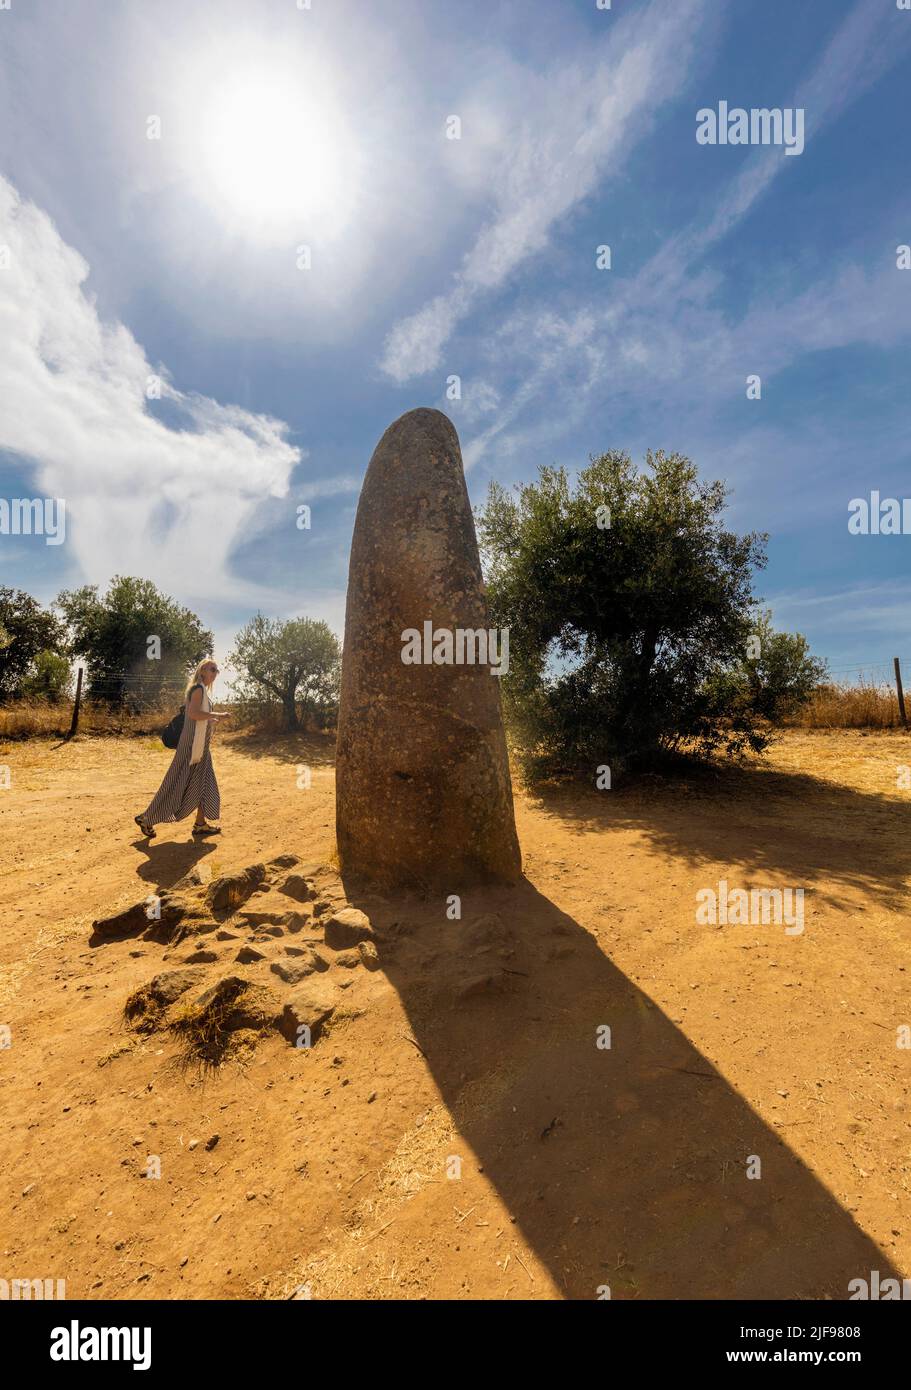 The isolated Menir dos Almendres neolithic standing stone, which is approximately 4.5 meters, or 14.76 feet tall, and some one and a half kilometres o Stock Photo